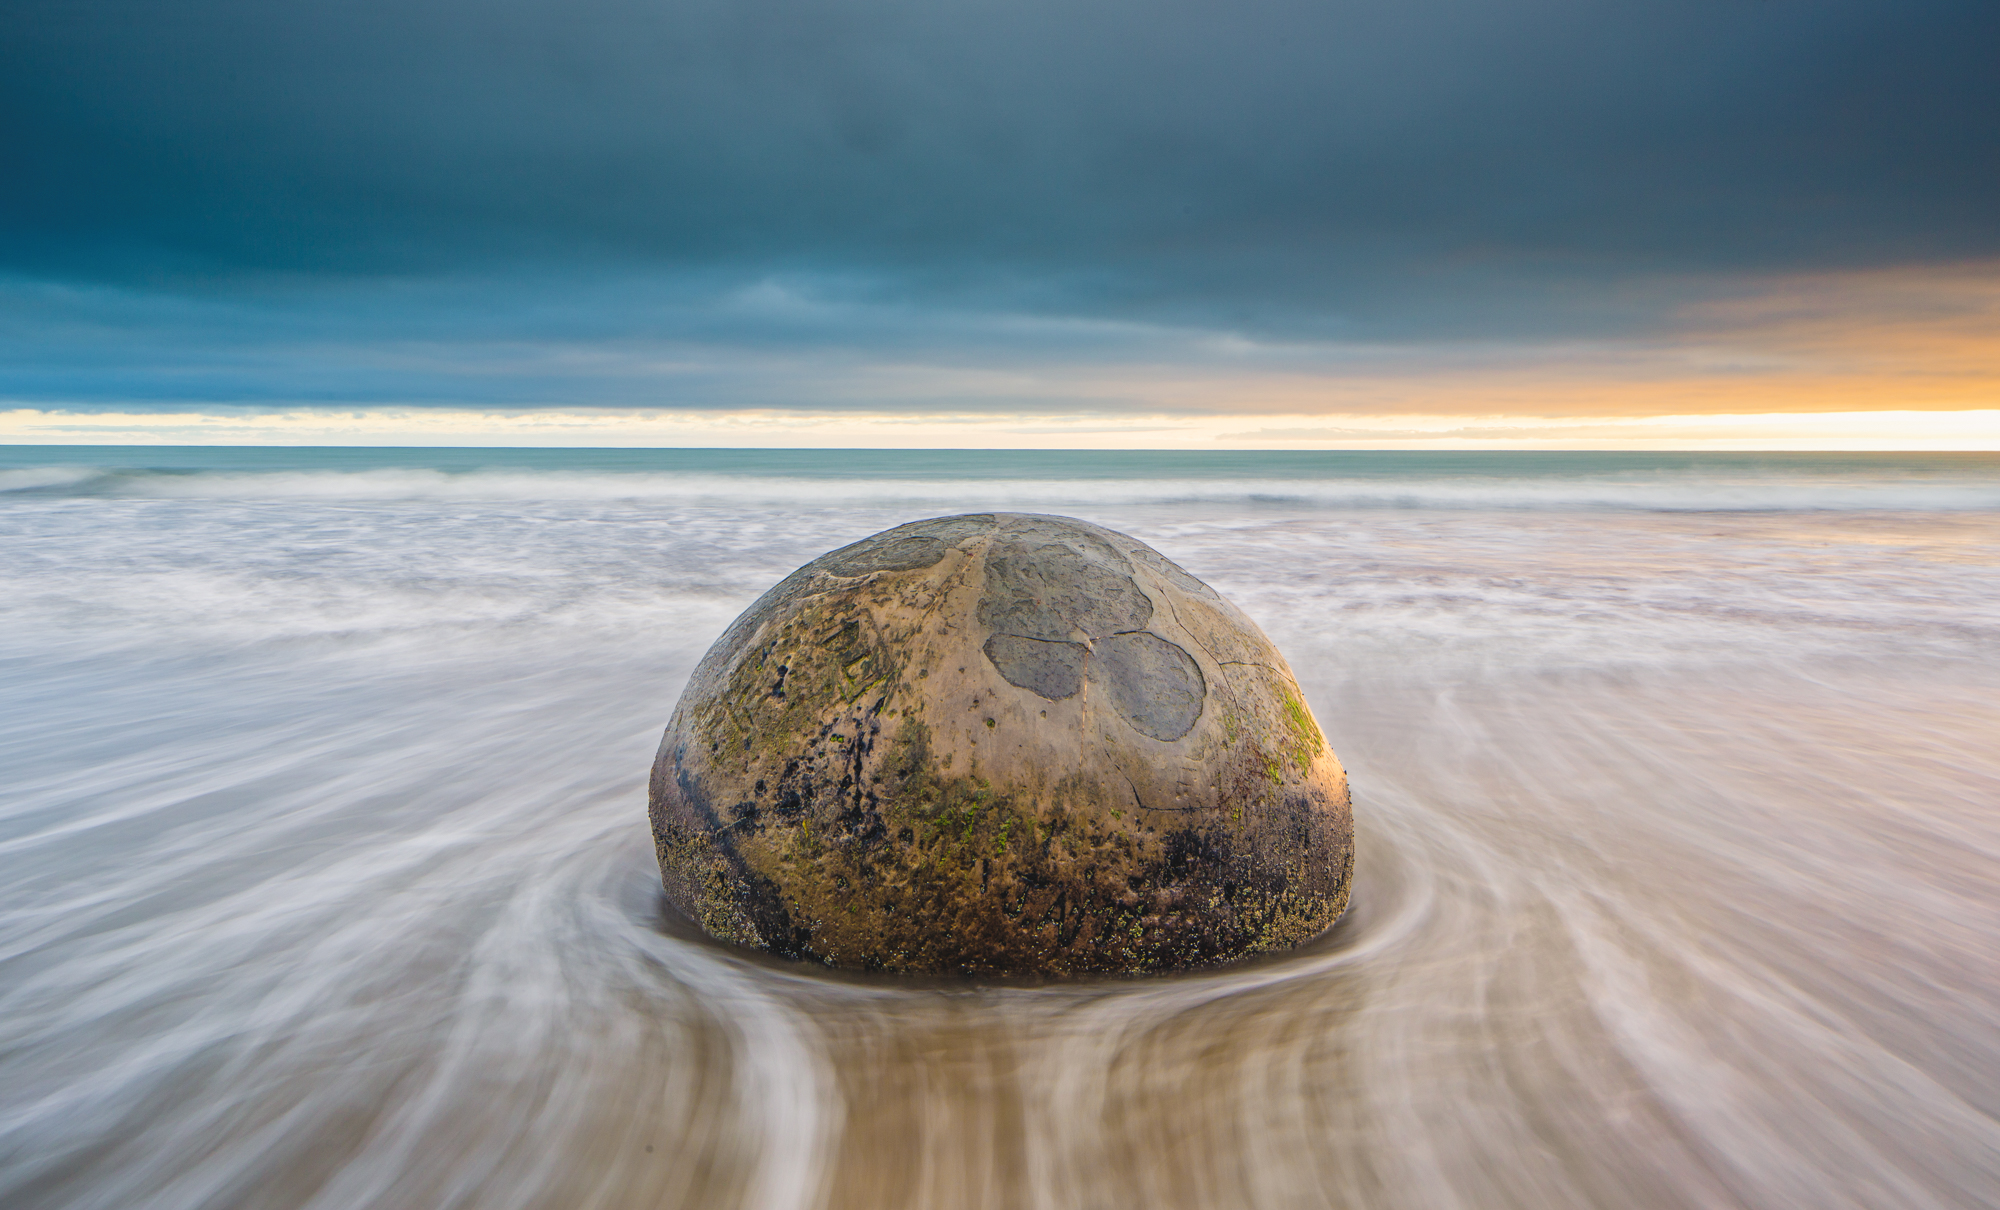 A rock stranded on the beach